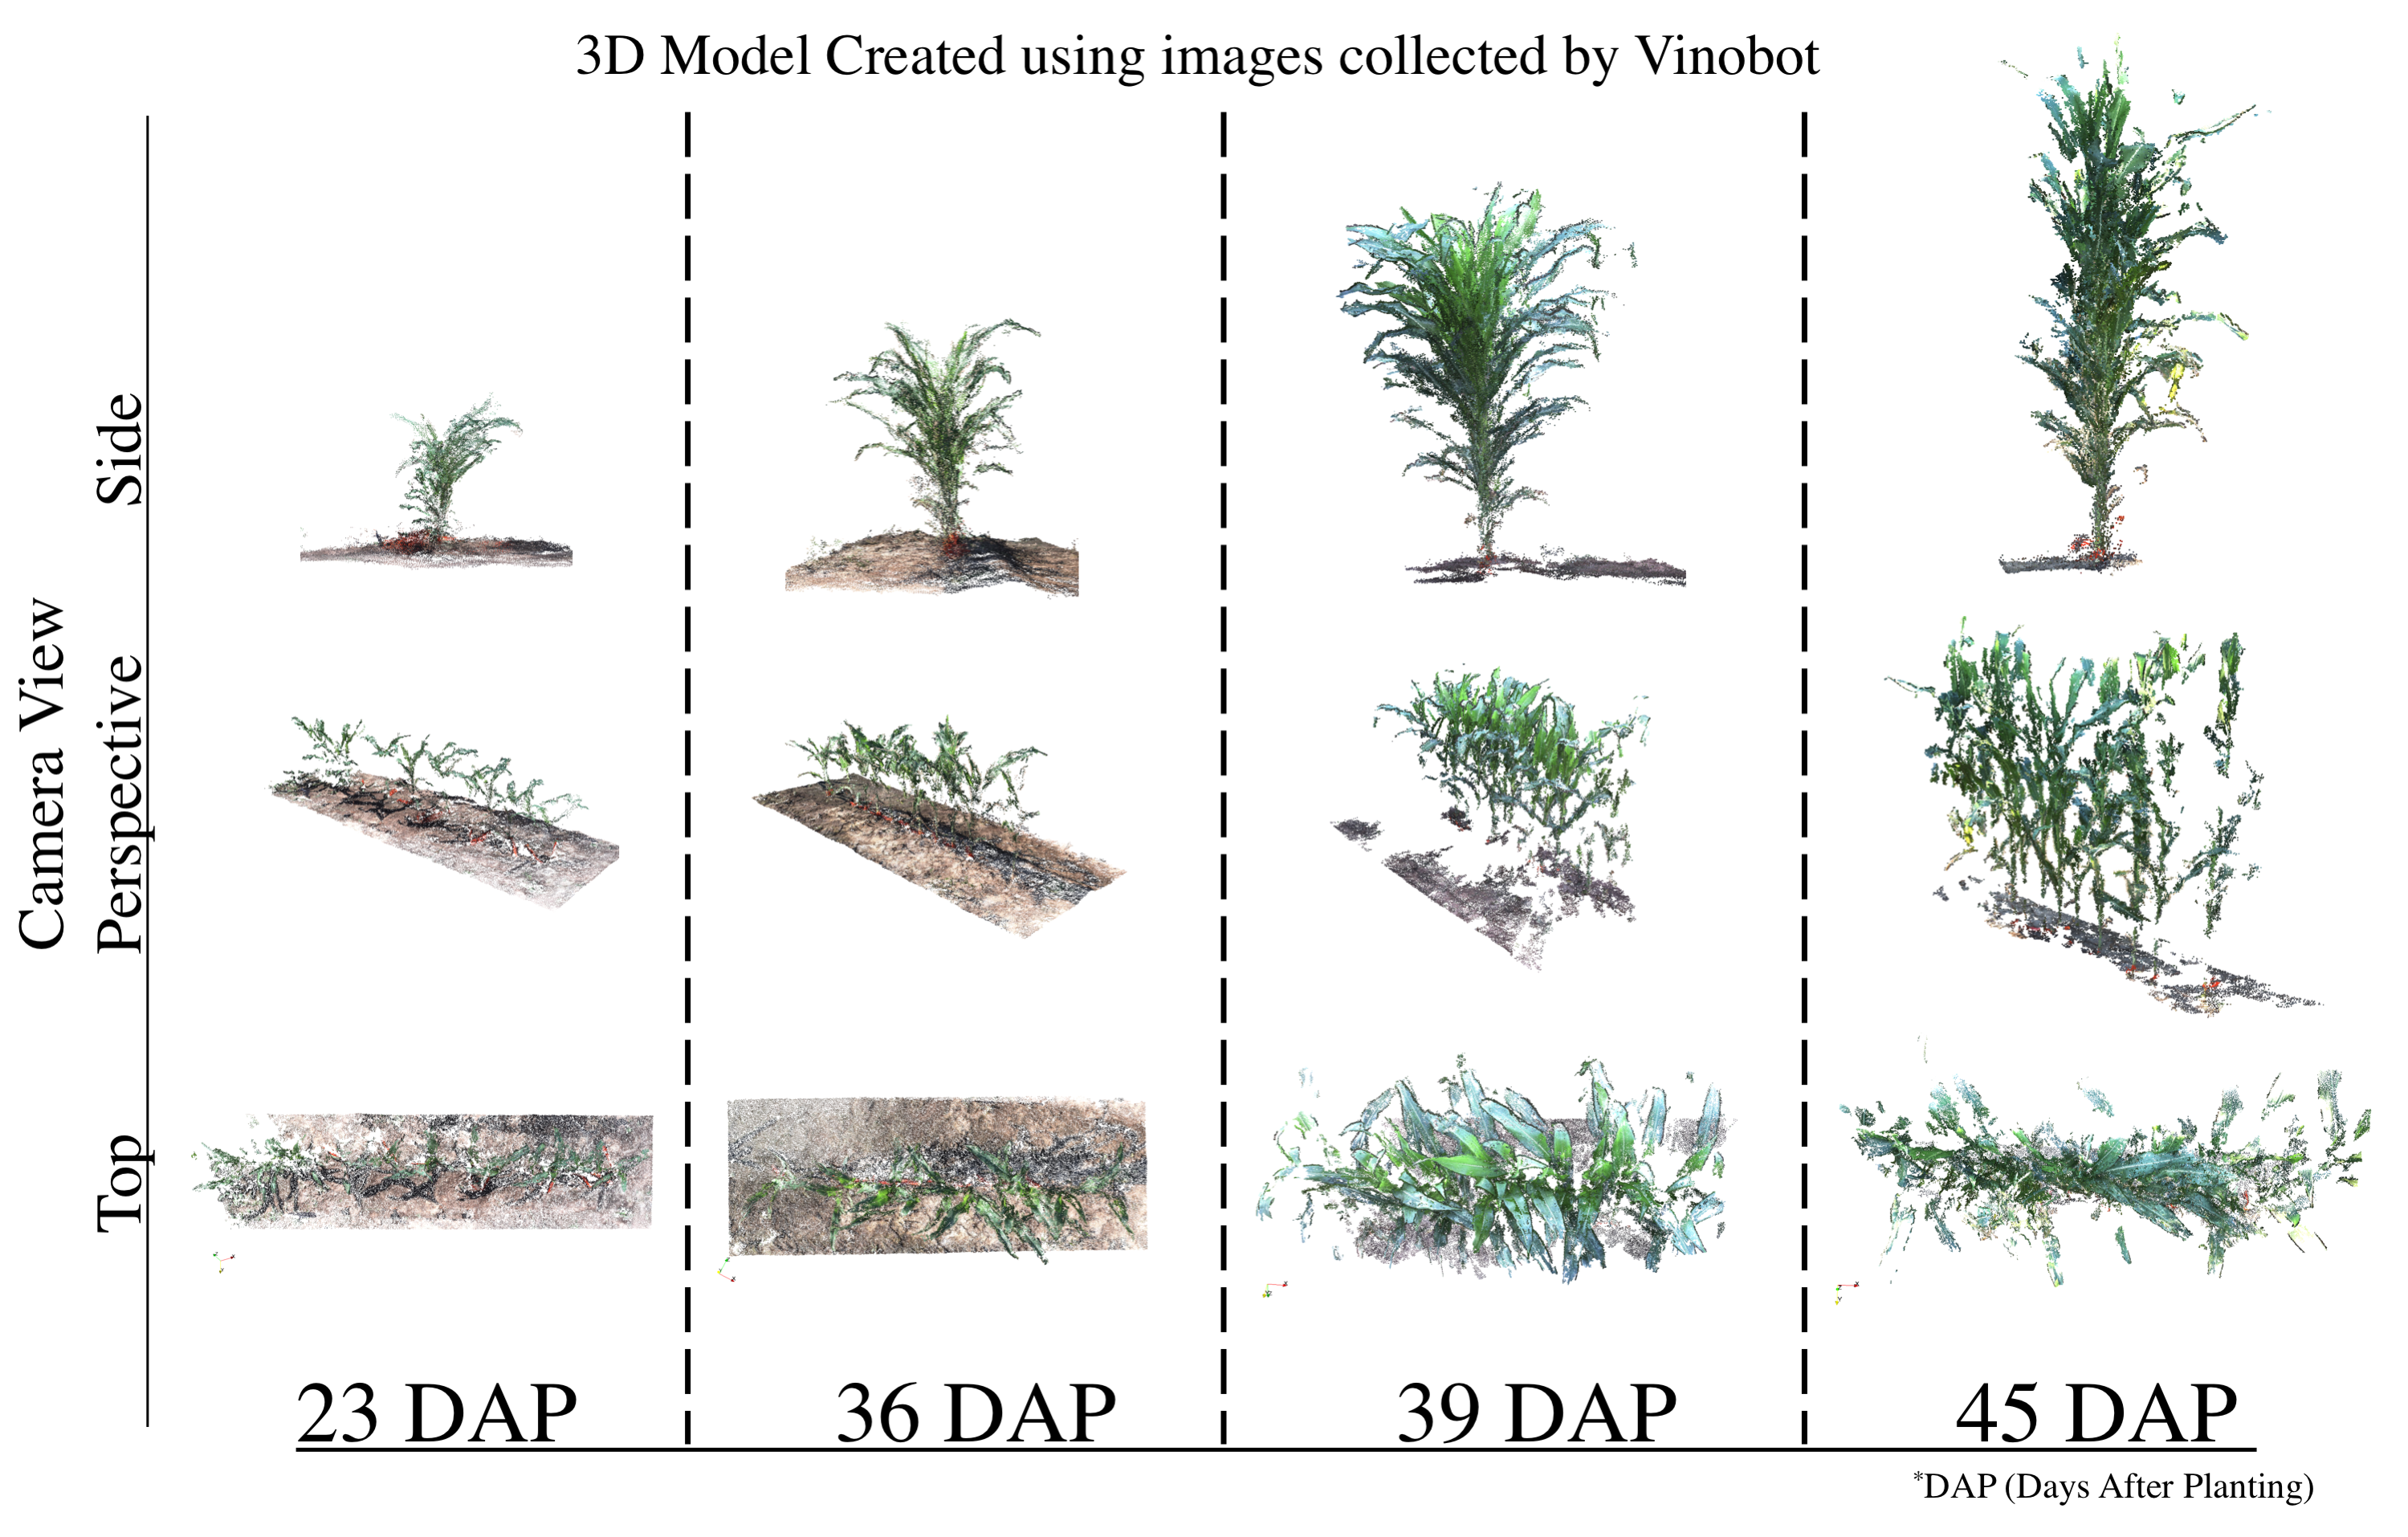 3D model of individual plants over growing period